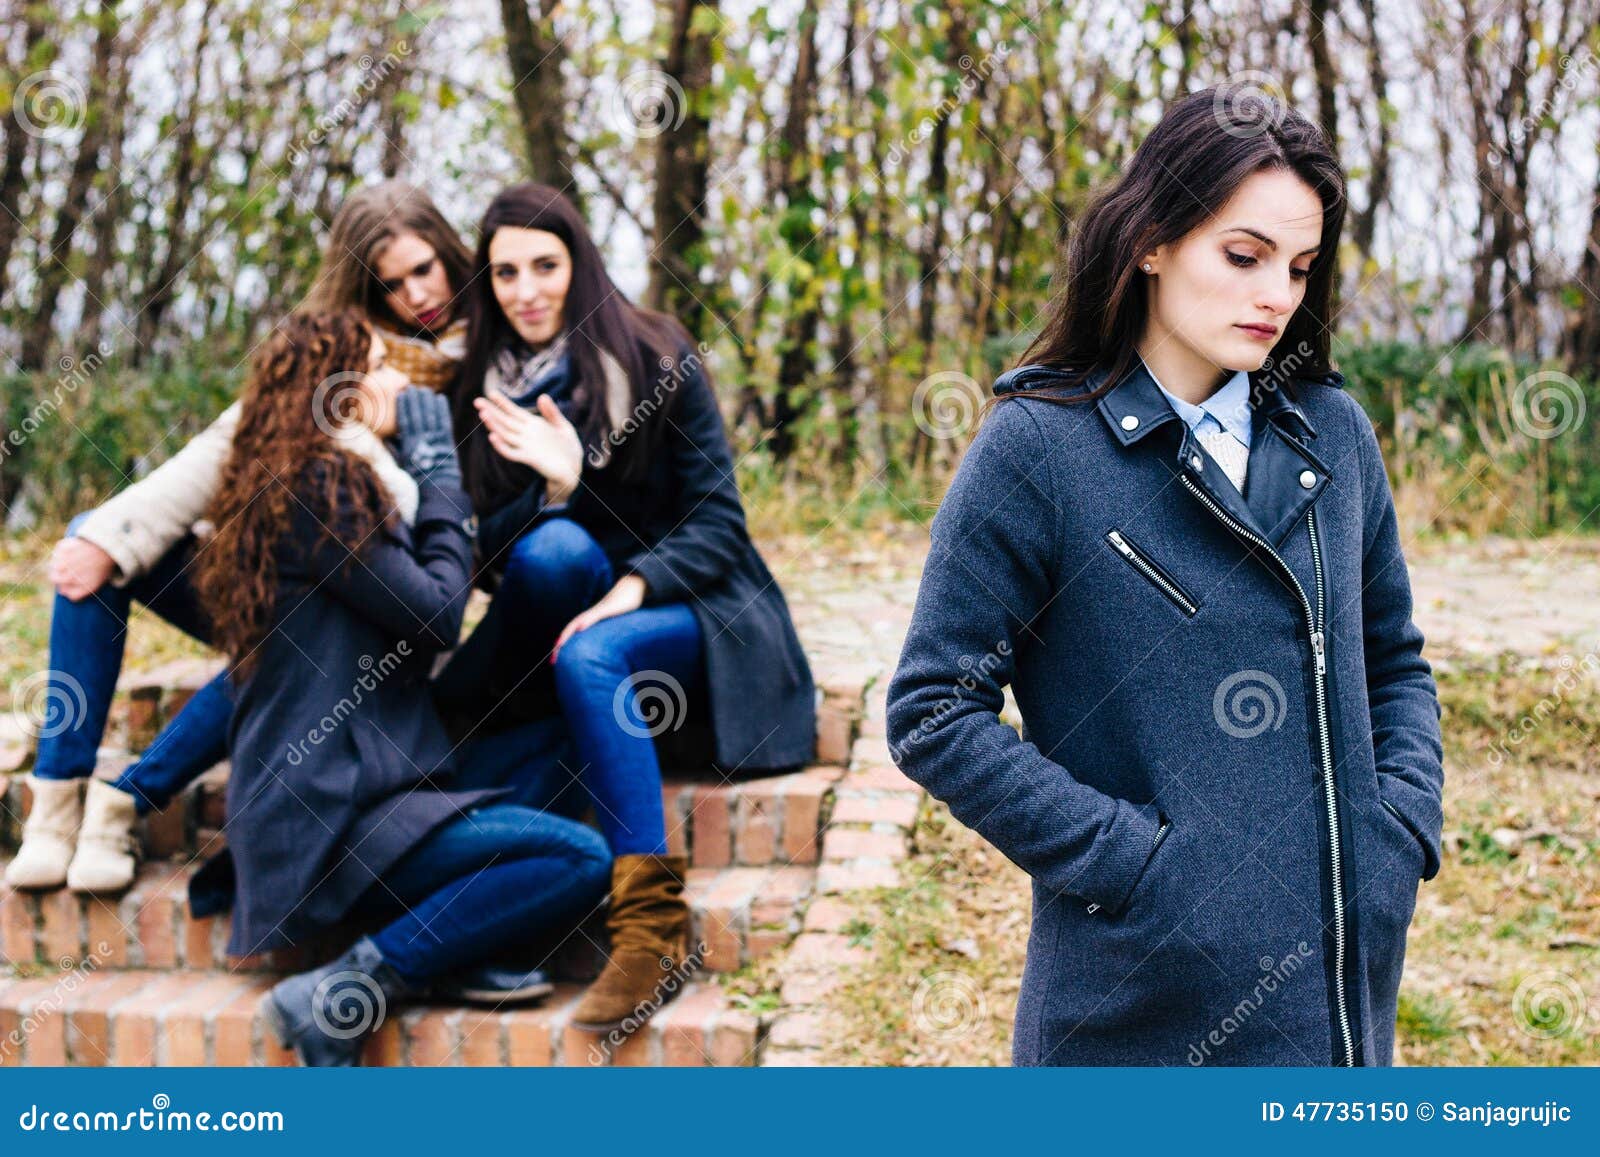 Sad Girl with Friends Gossiping Stock Photo - Image of facial ...